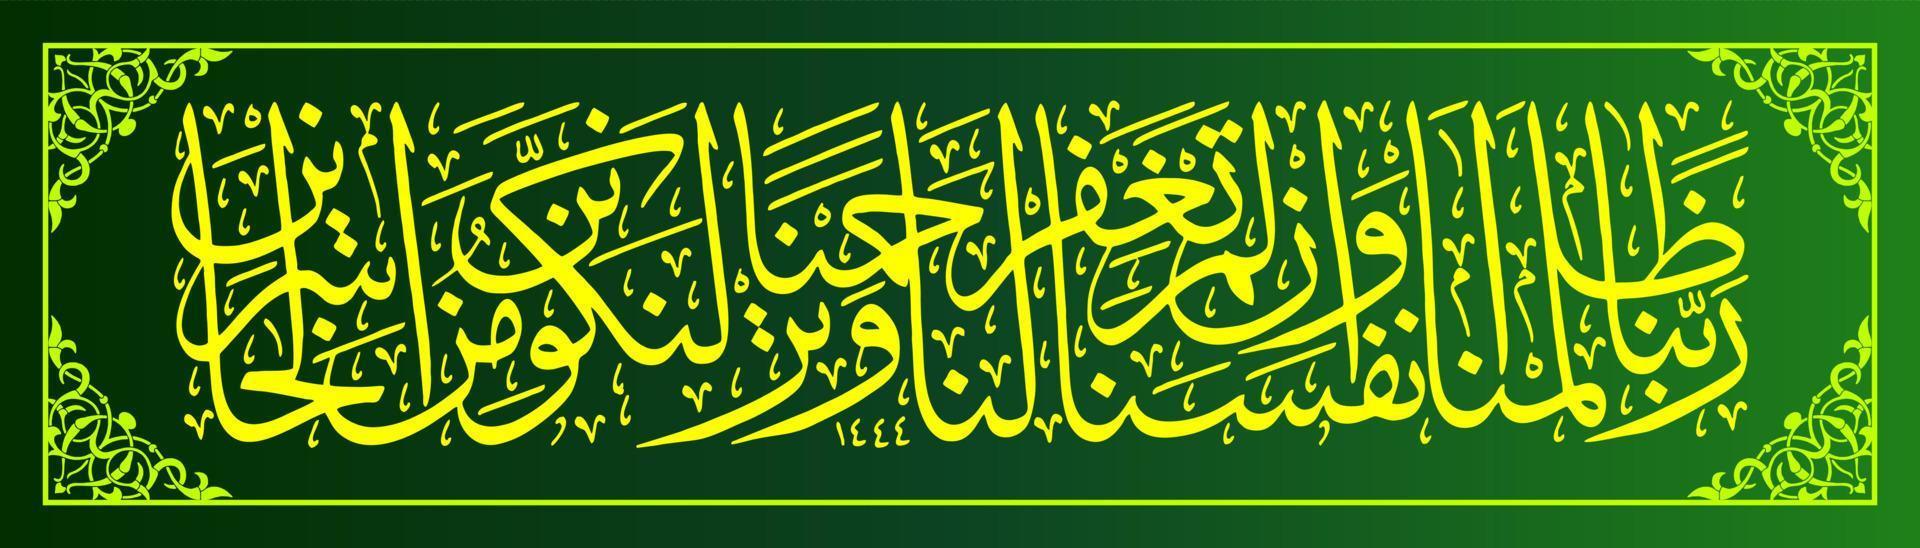 Arabic Calligraphy, Al Qur'an Surah Al-A'raf verse 23, Translation They say, O our Preserver, indeed we have wronged ourselves. And if You do not forgive us and have mercy on us, vector